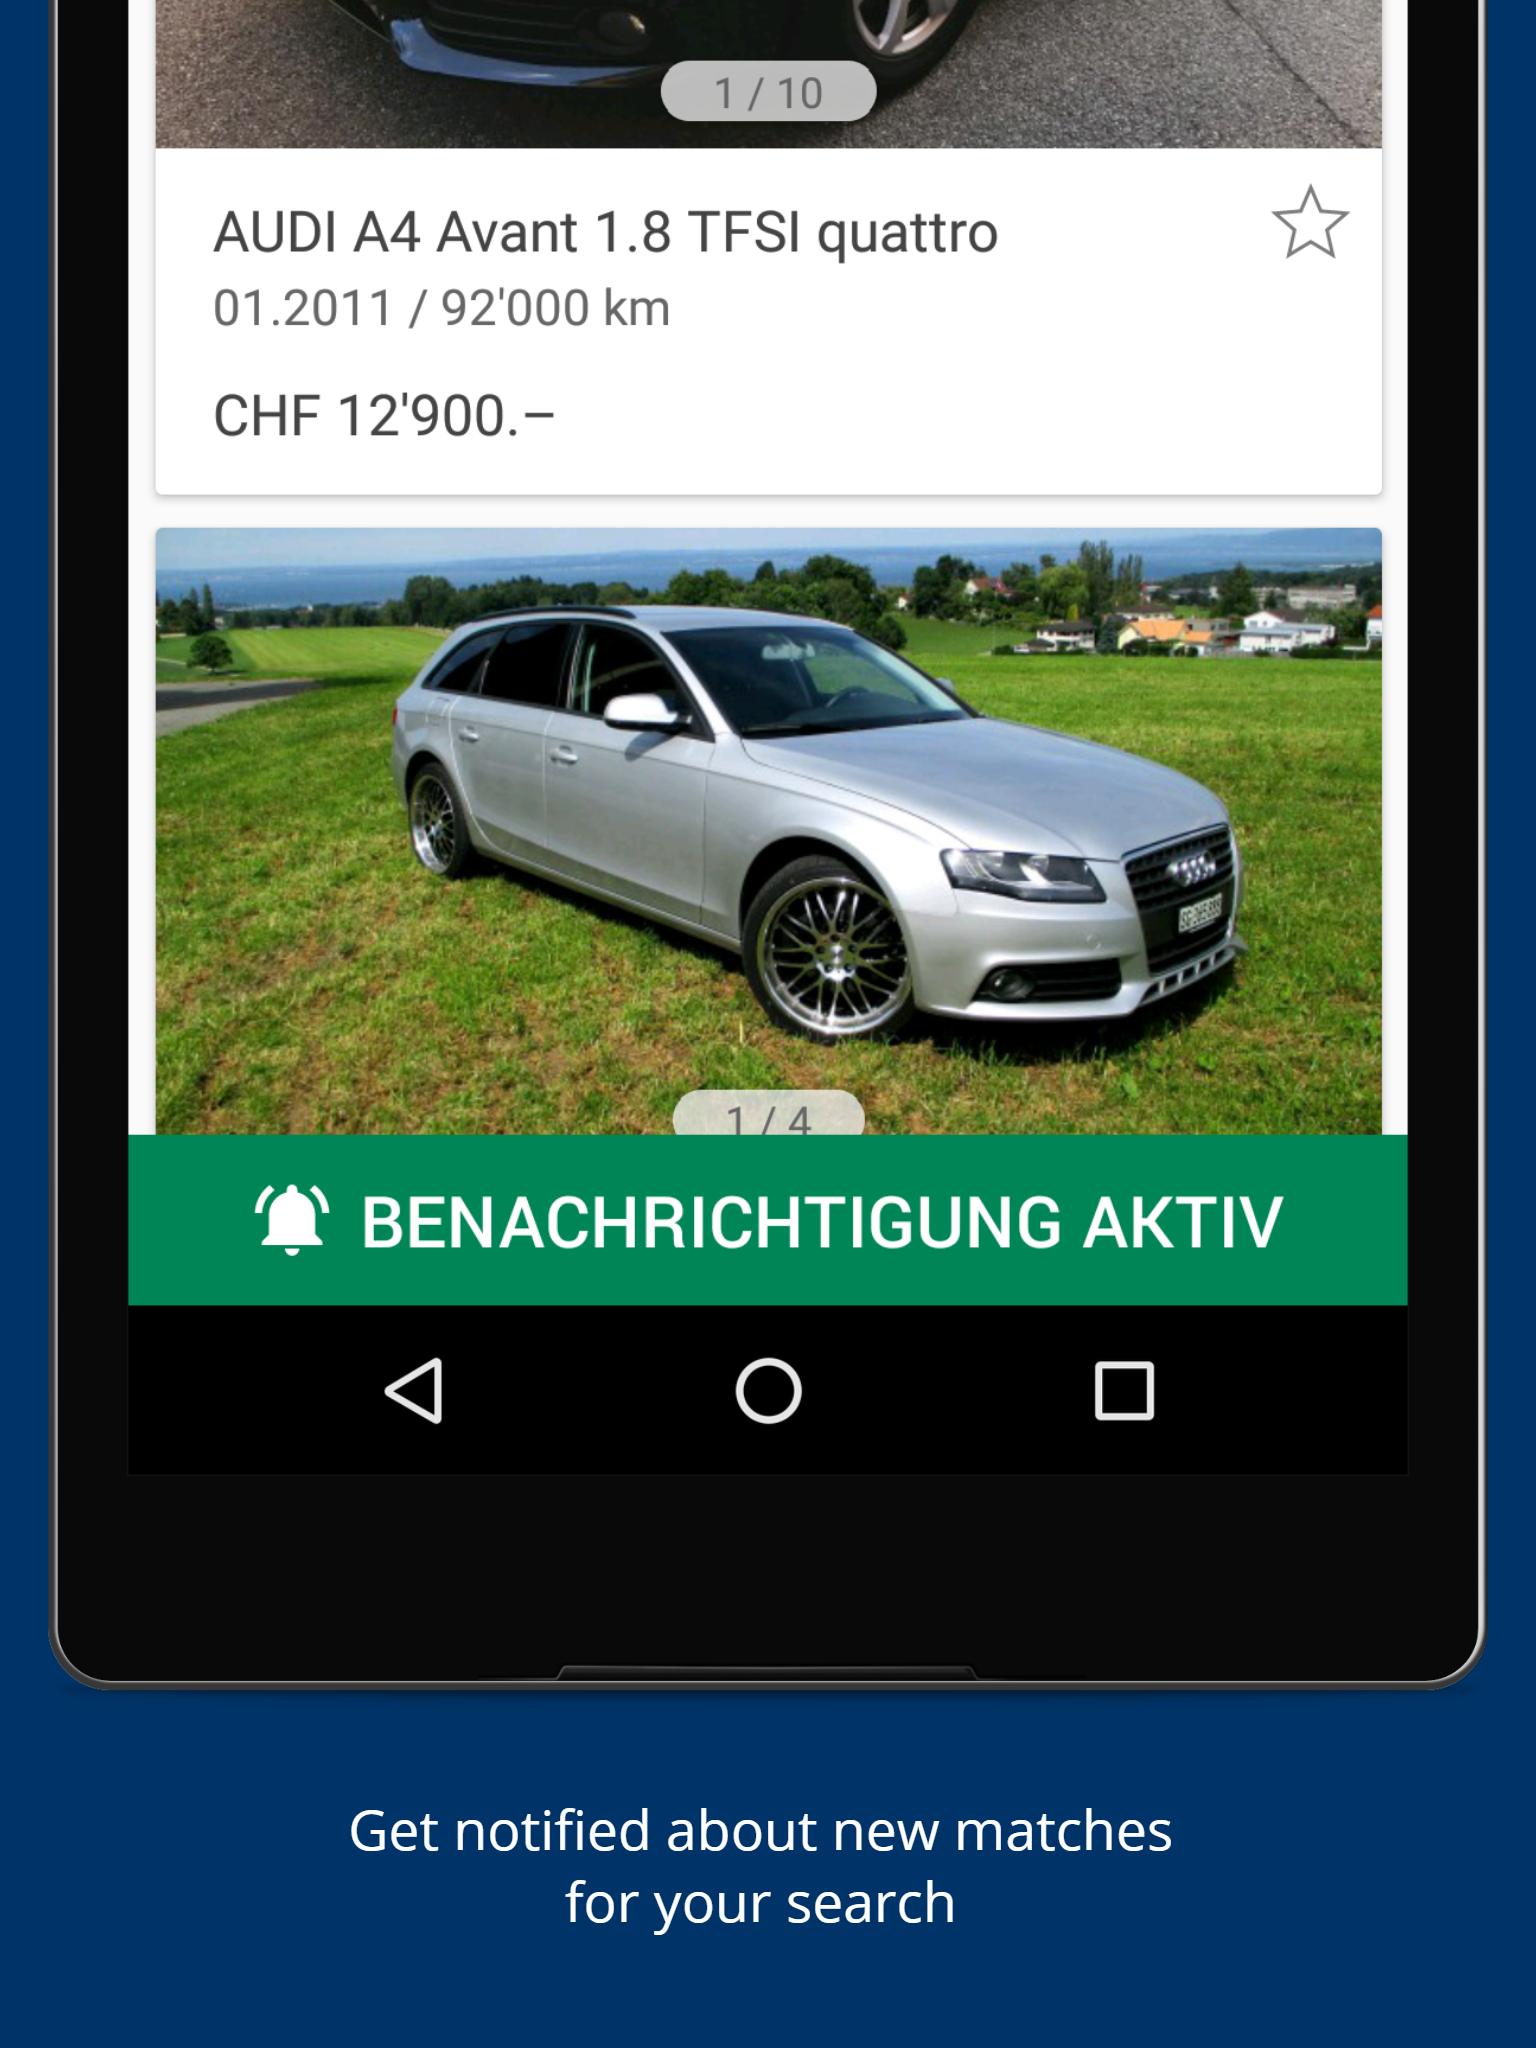 AutoScout24 Switzerland – Find your new car 4.0.0 Screenshot 10